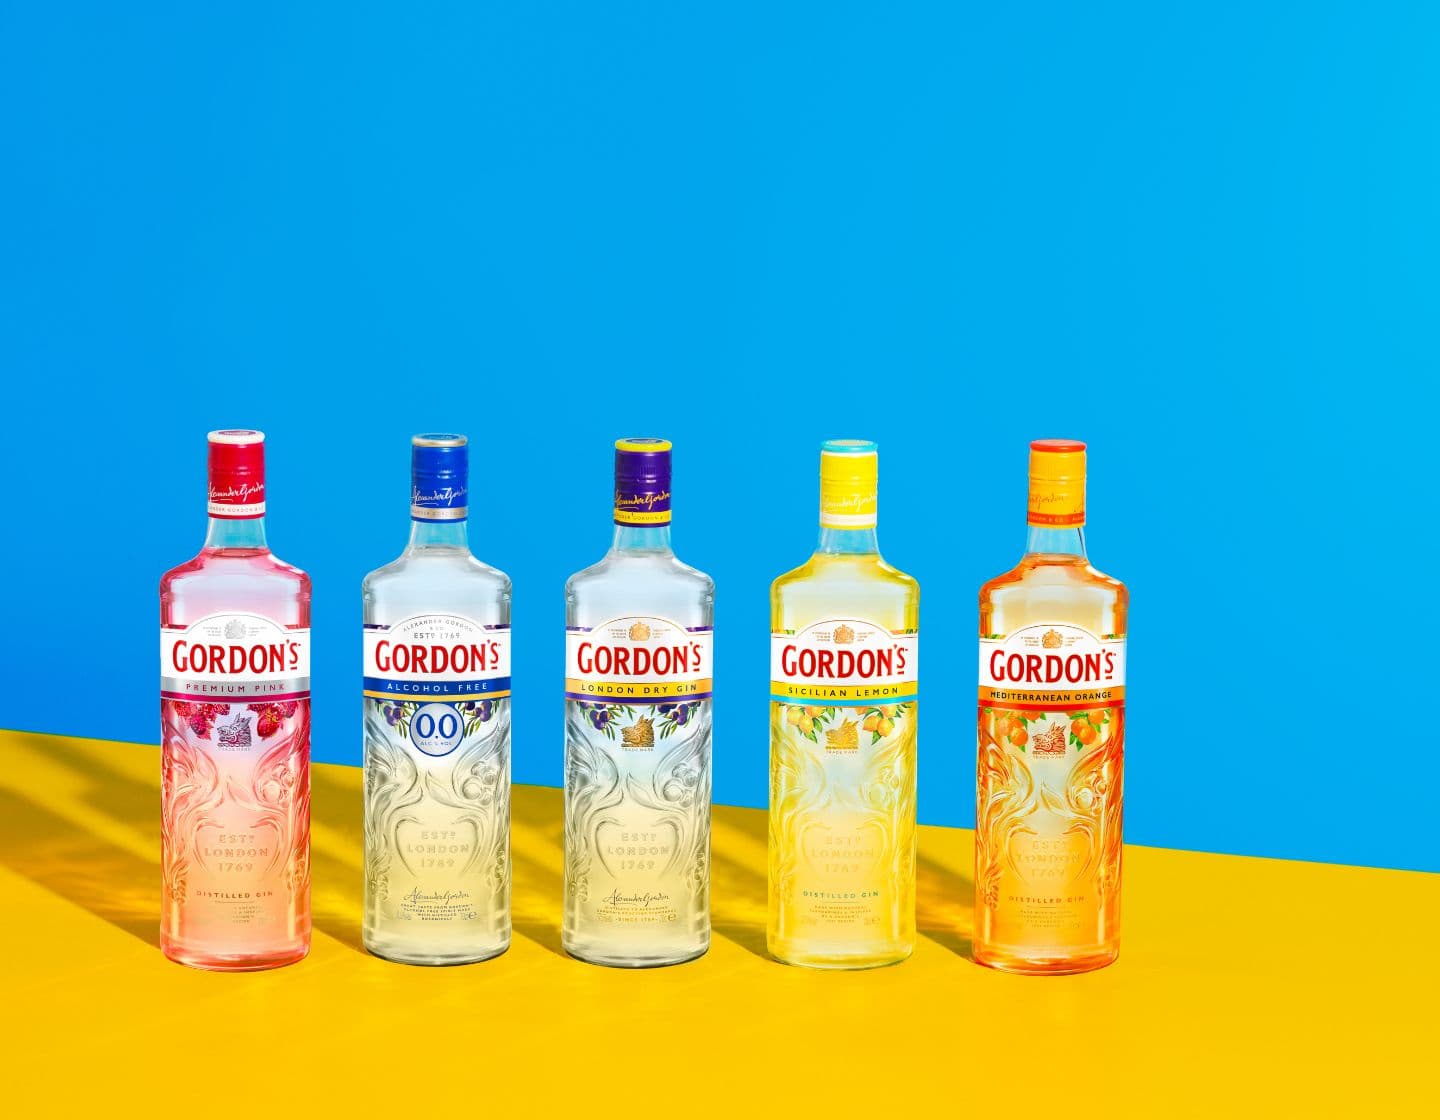 All Gordon’s gin variants lined up against a blue and yellow background. 